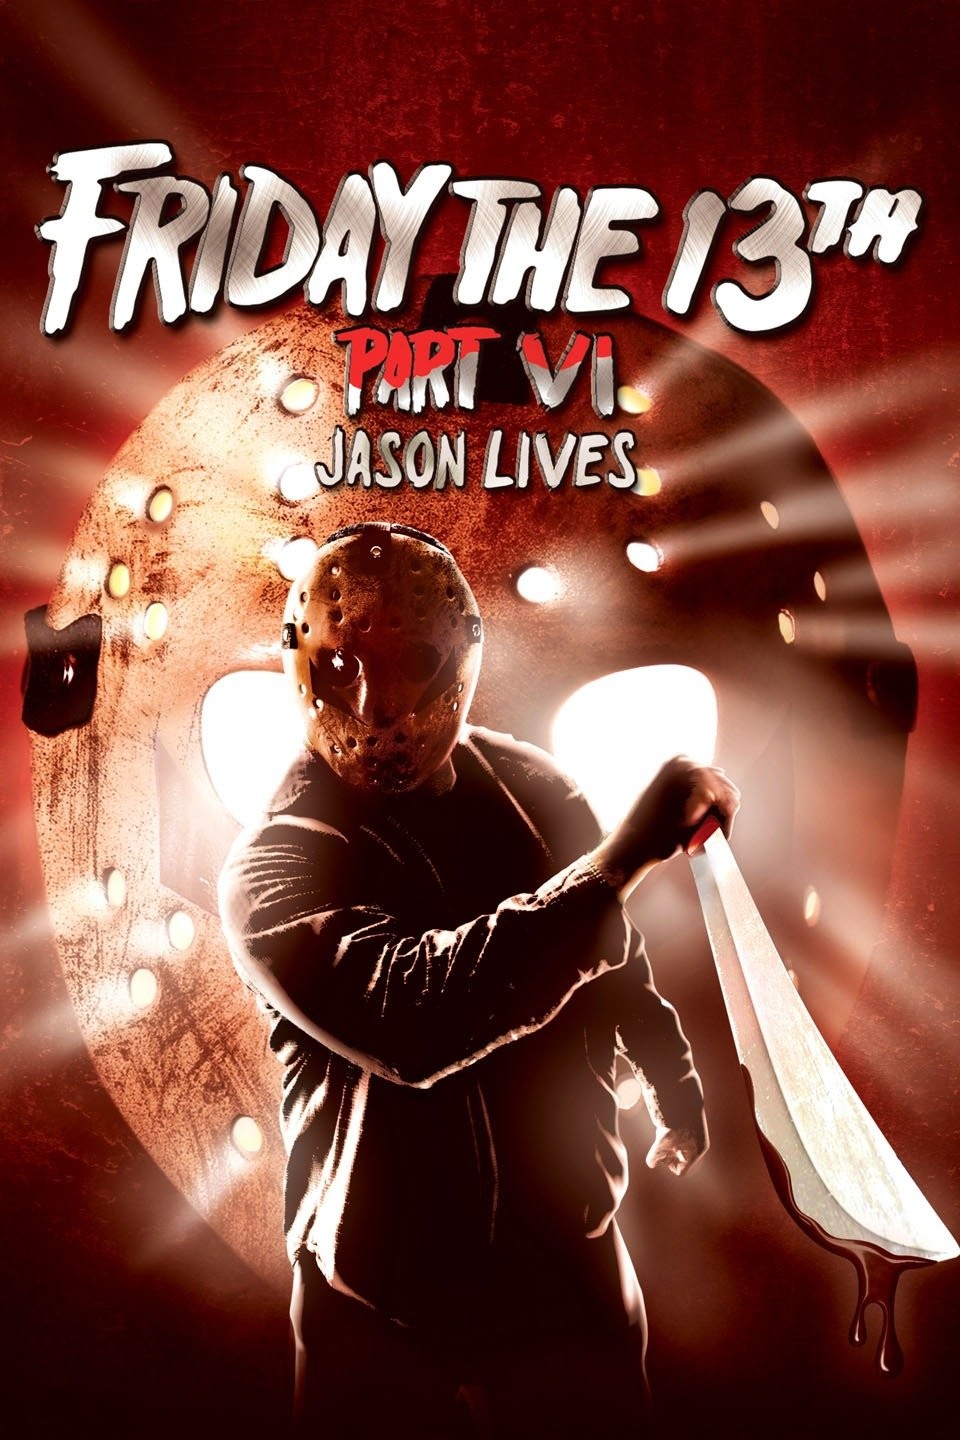 Friday the 13th, Part VI: Jason Lives - Rotten Tomatoes